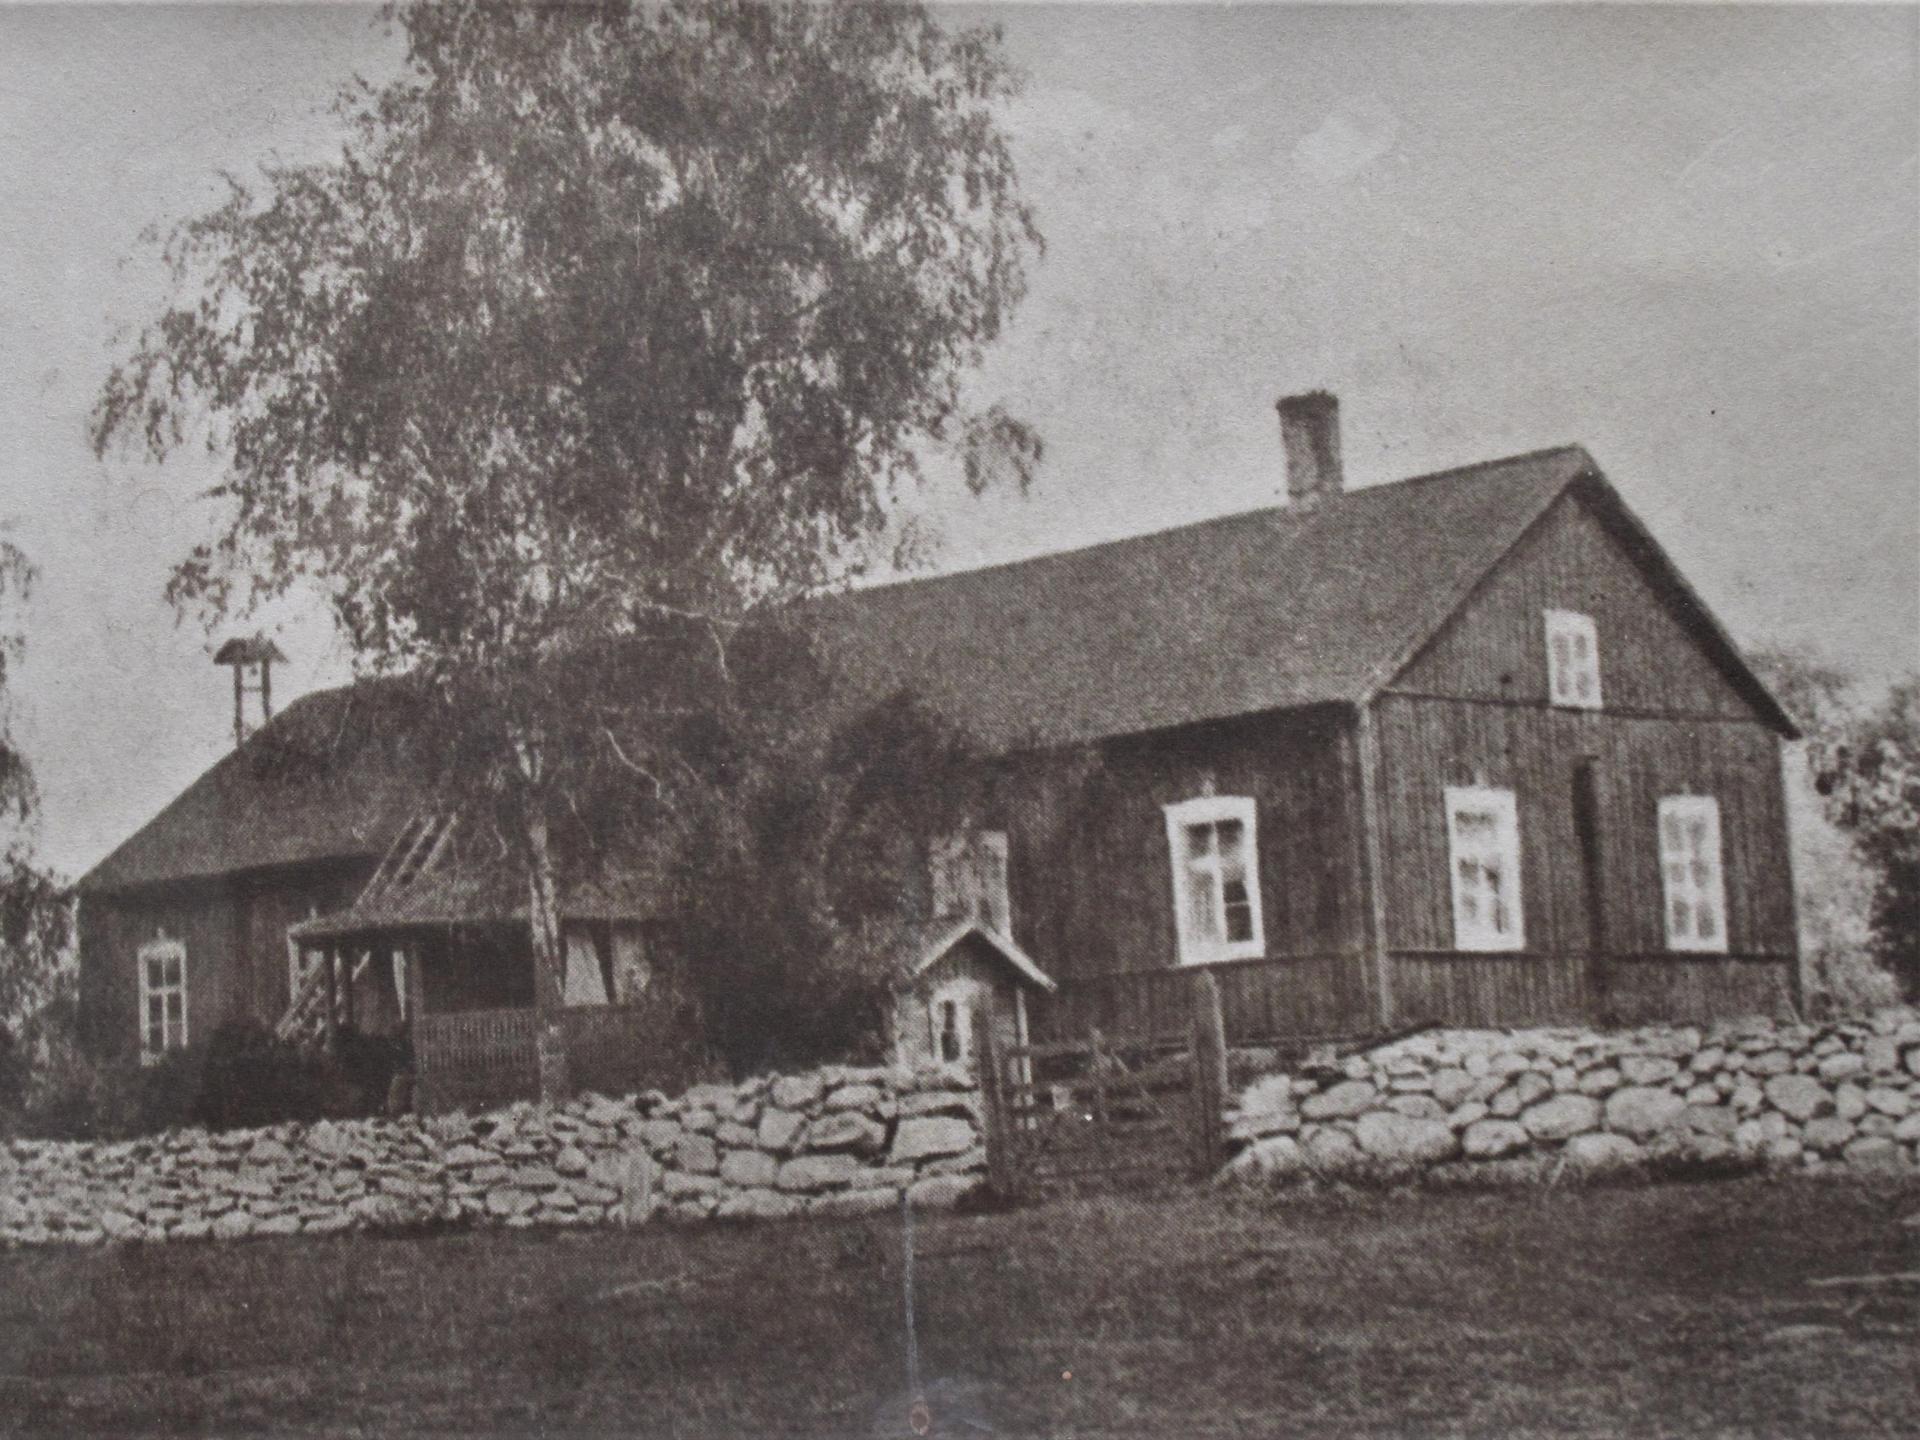 Old wooden building with a porch and a stone wall in front of the house. 